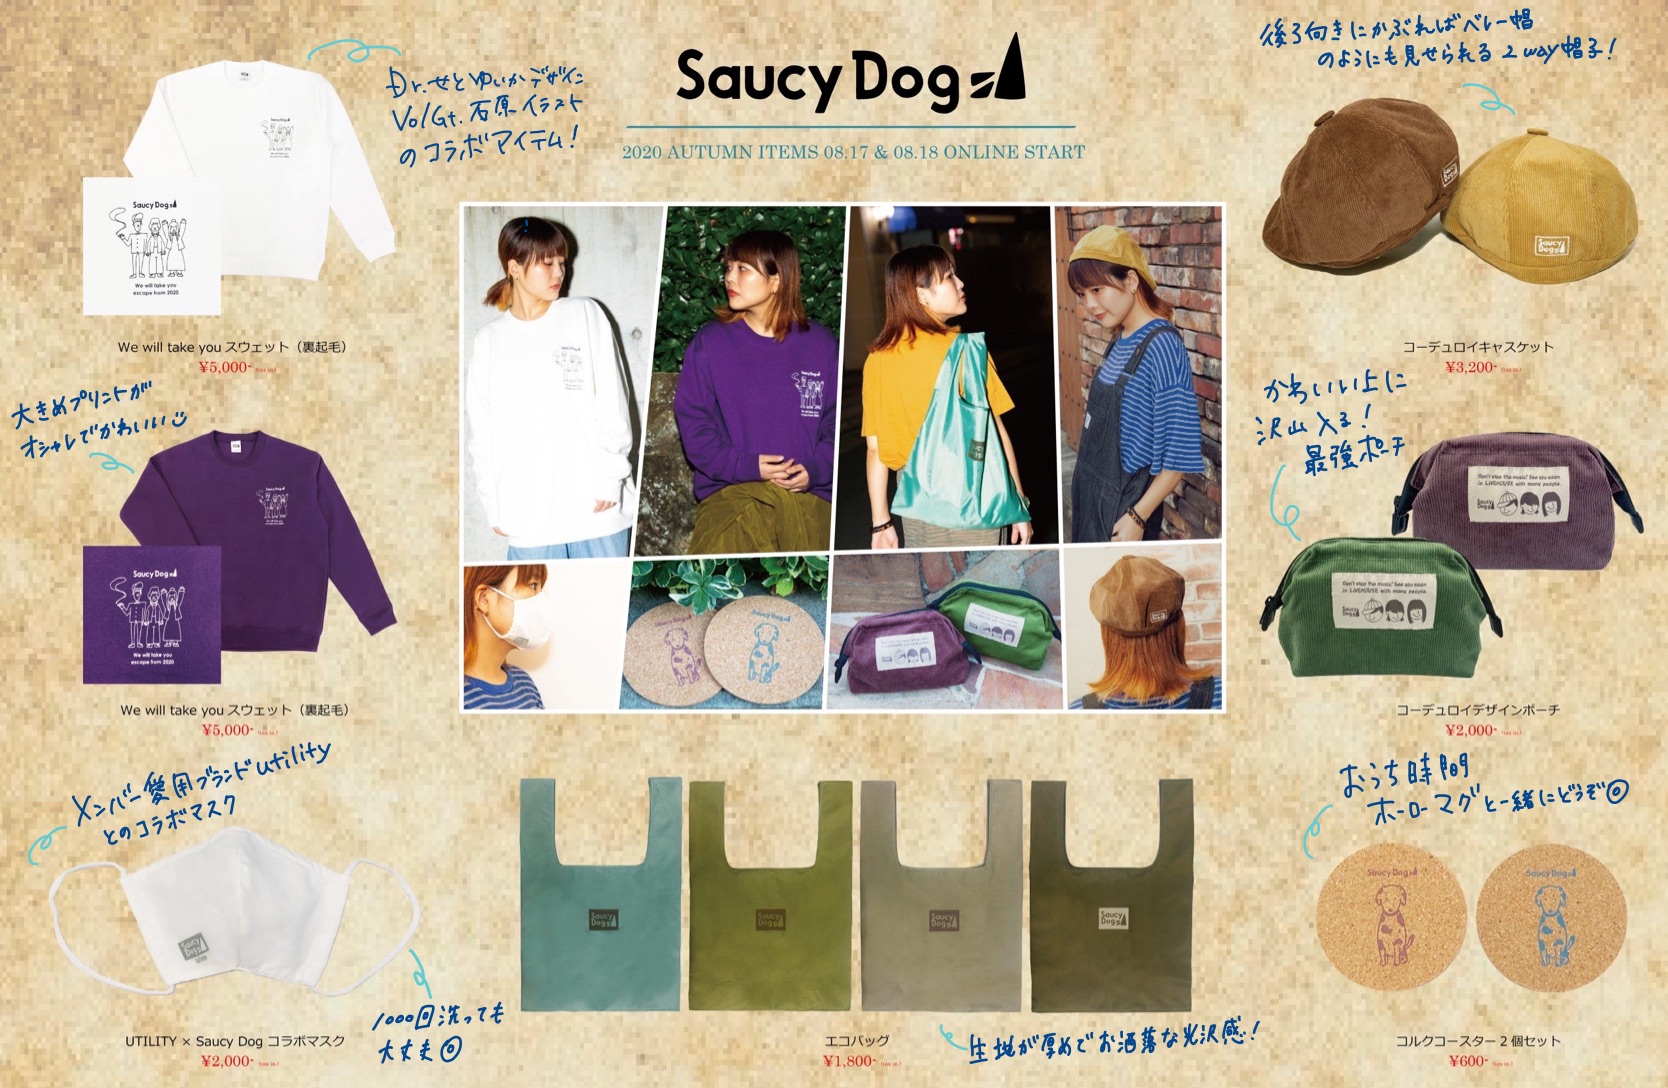 NEW GOODSが登場｜Saucy Dog Official Site